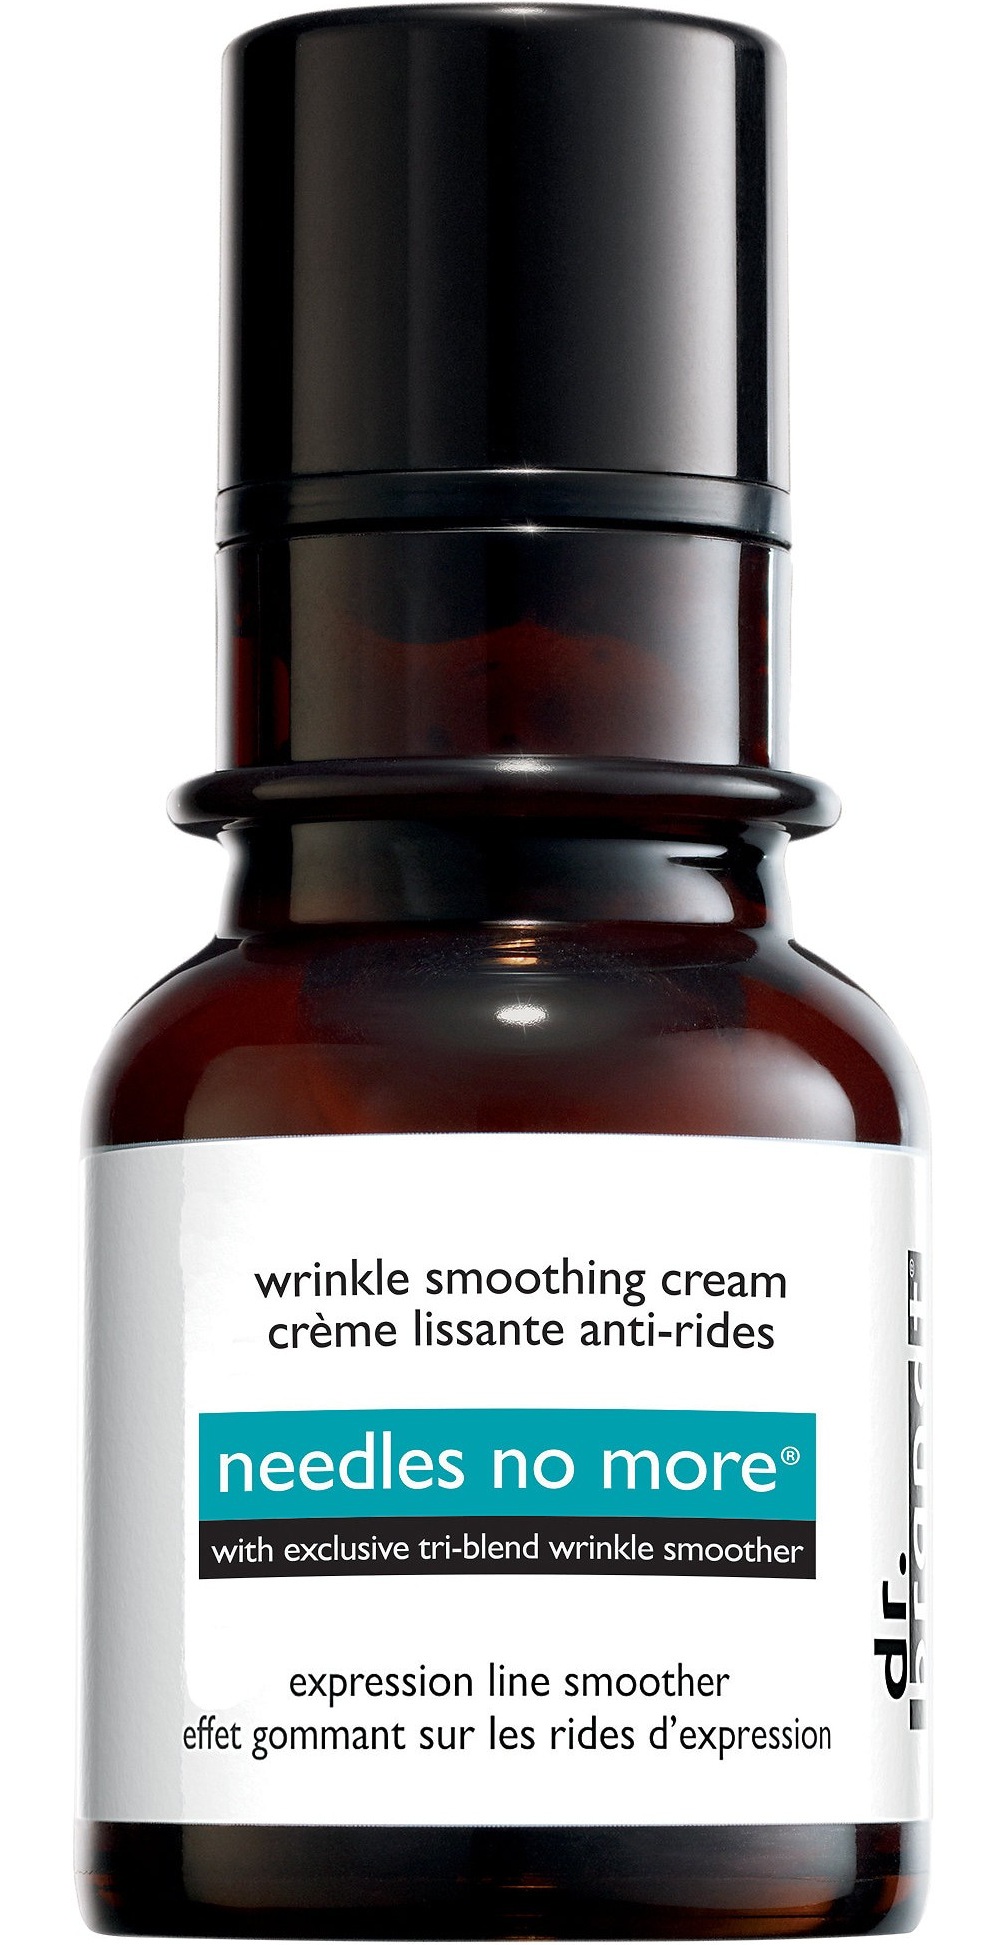 Dr. Brandt Skincare Needles No More® Wrinkle Smoothing Cream